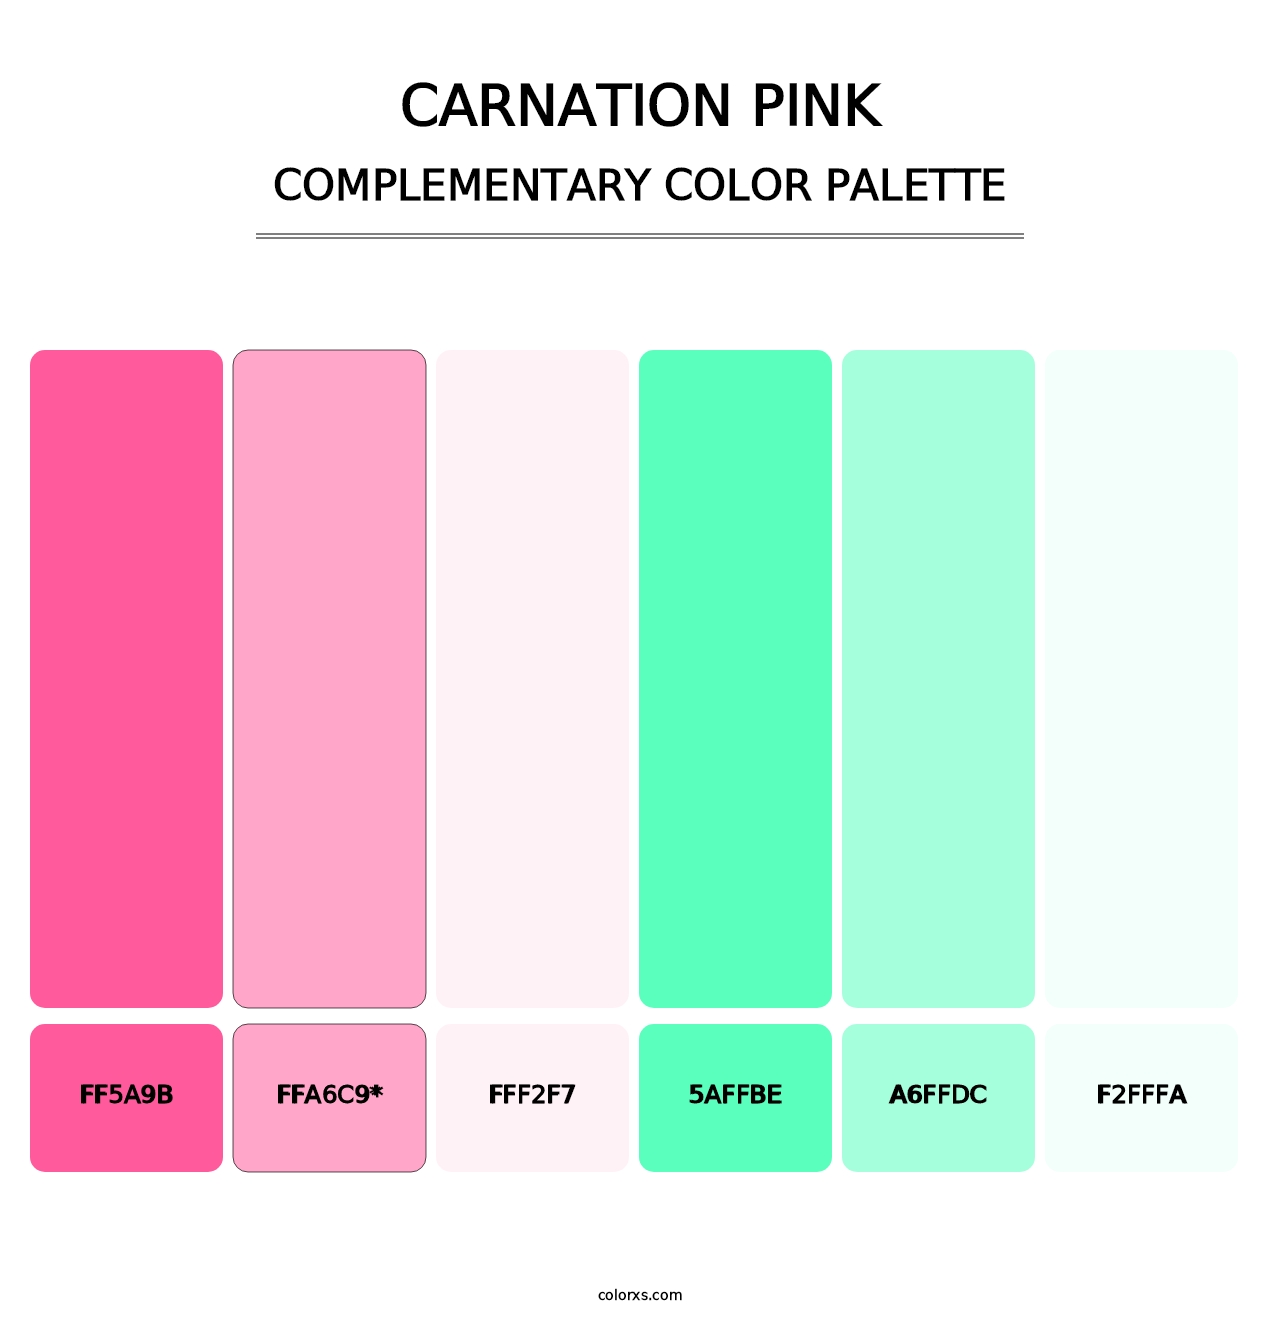 Carnation Pink - Complementary Color Palette